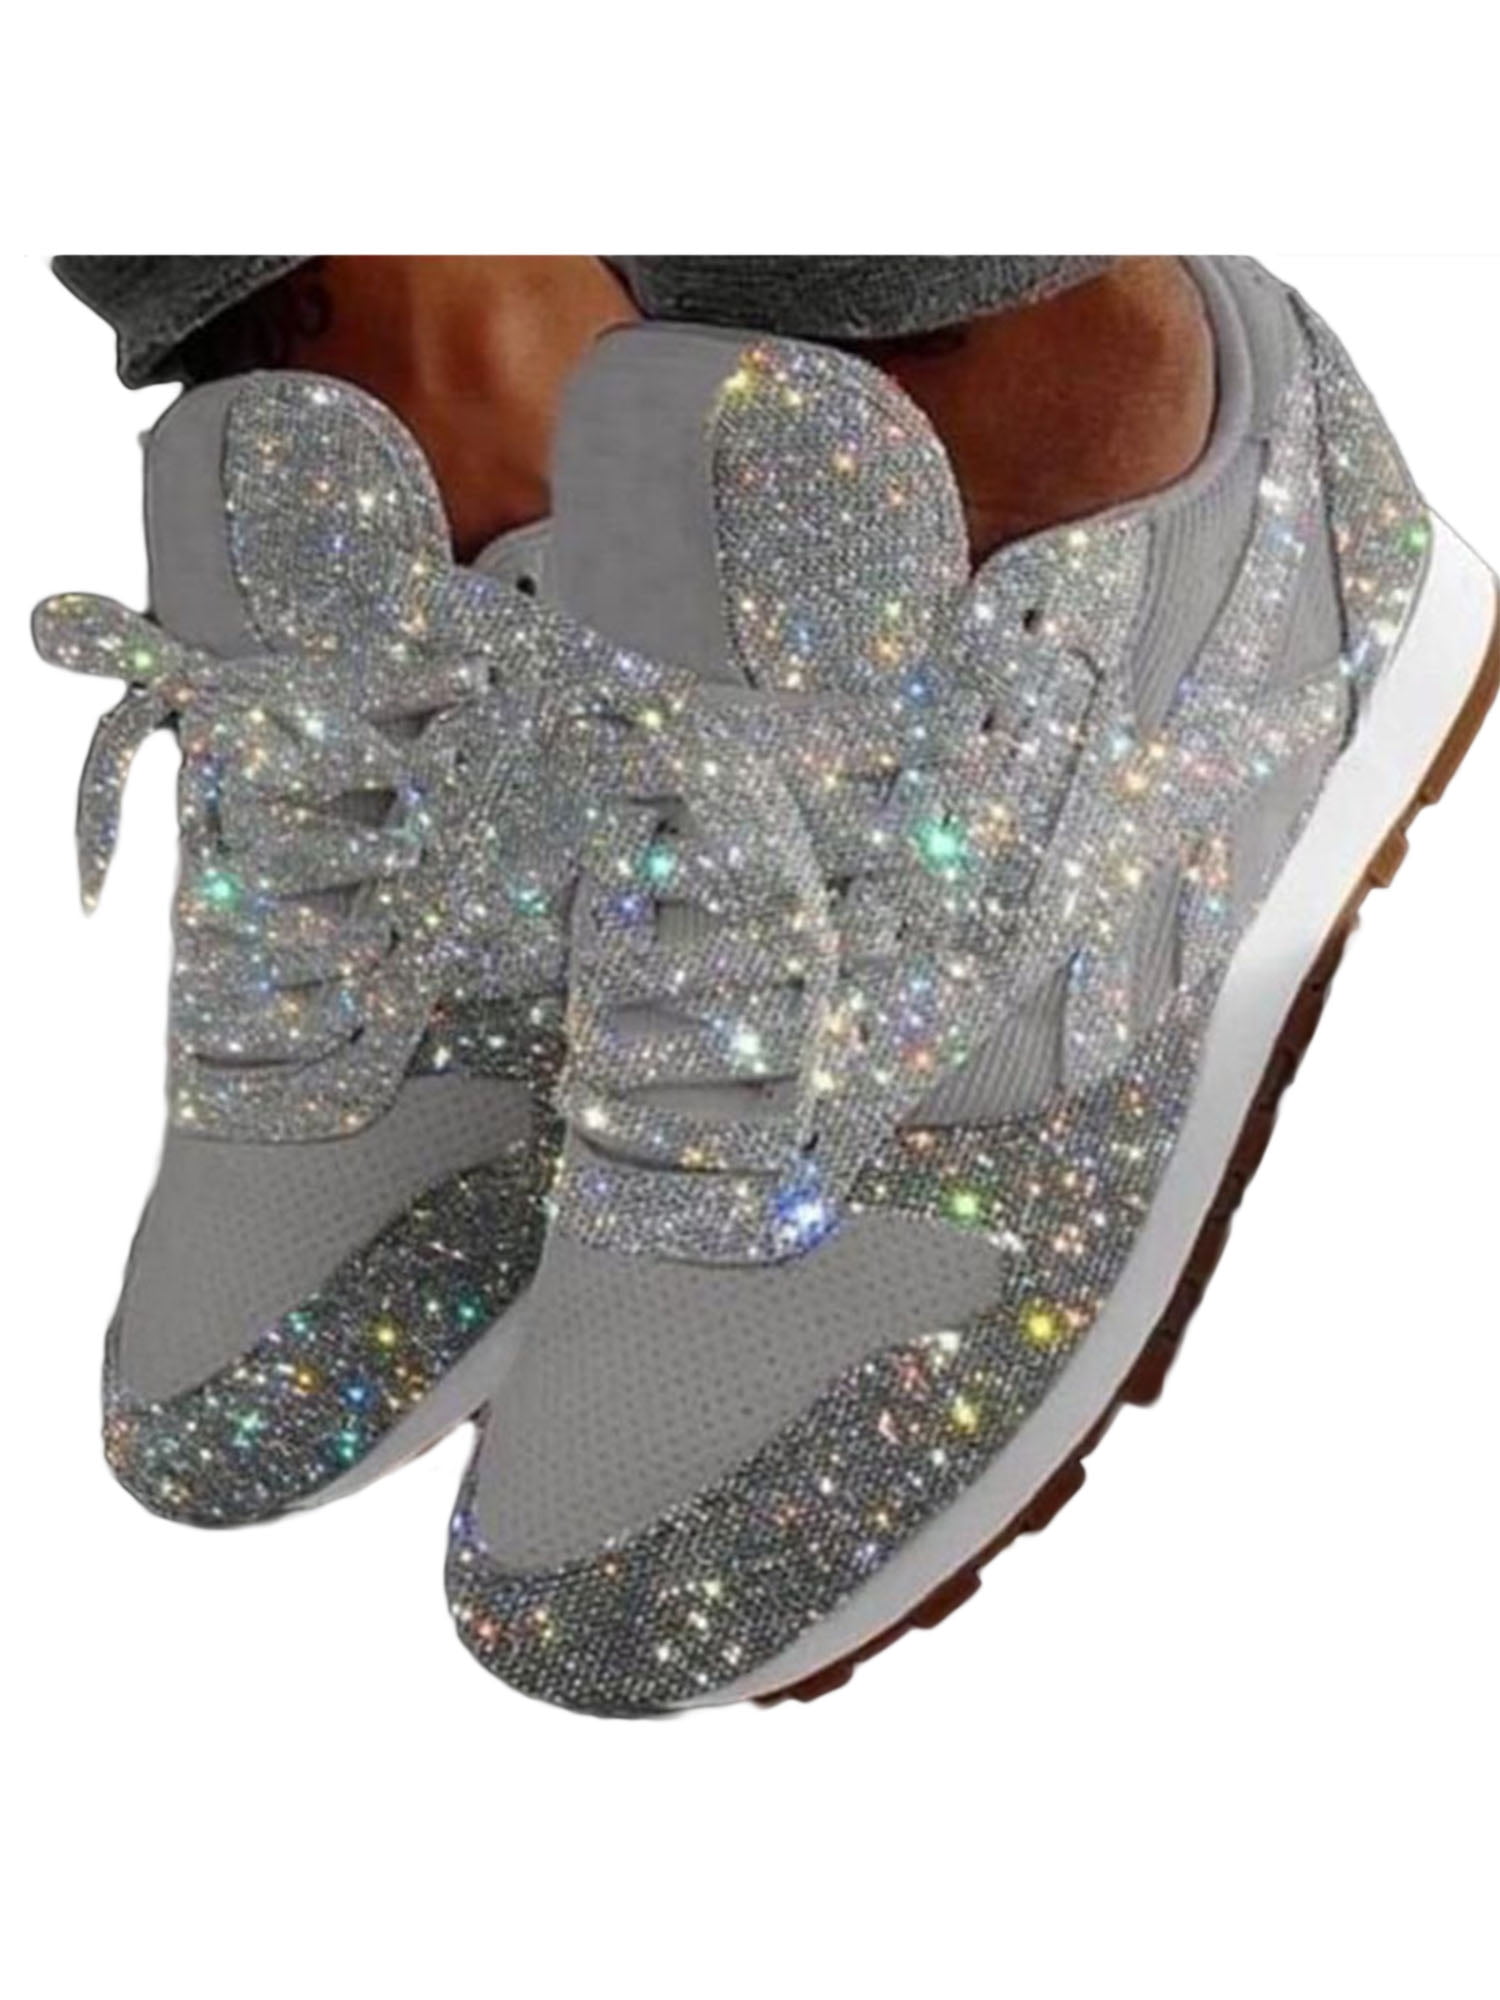 LED USB Light Up Unisex Shoes Trainers Sneakers Silver UK3 UK4 